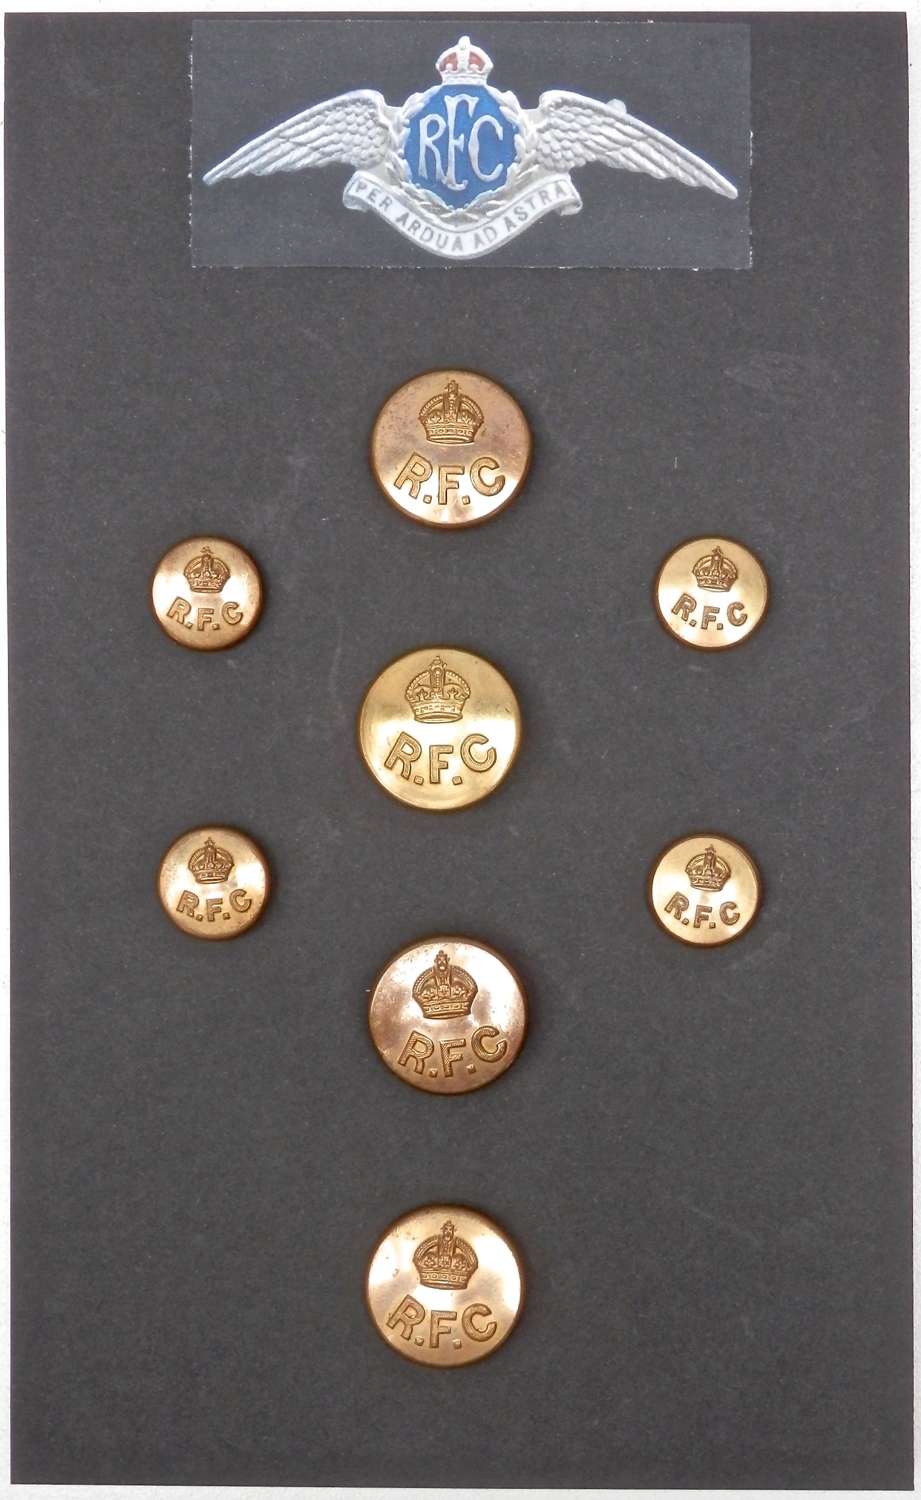 Royal flying corps tunic buttons